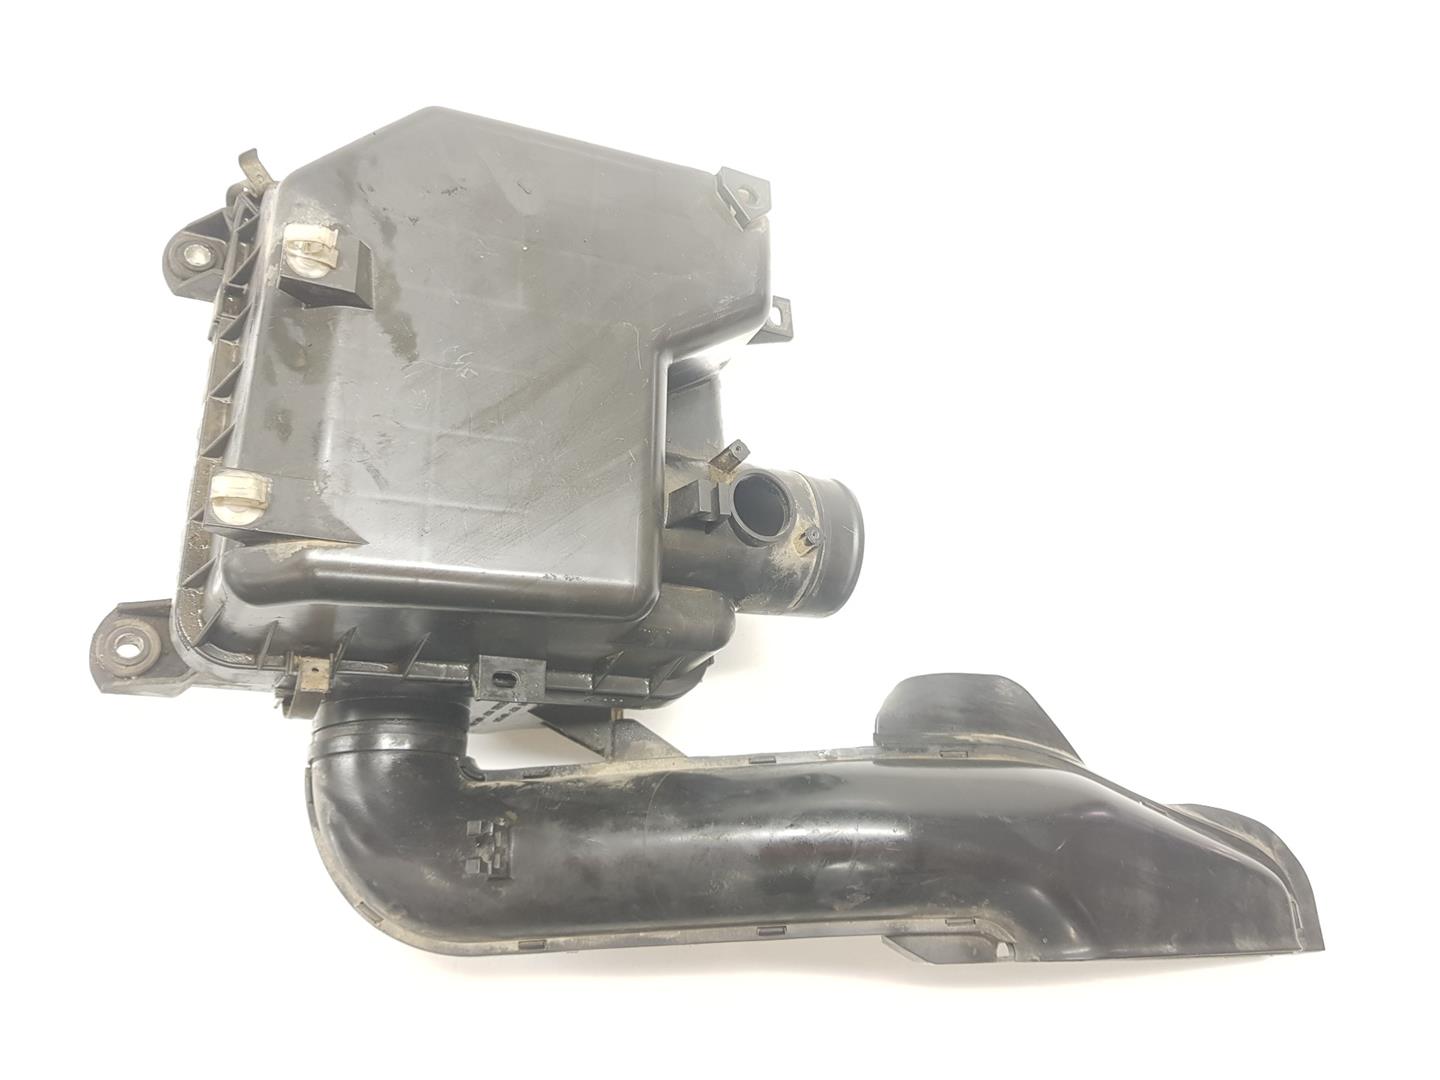 MITSUBISHI L200 4 generation (2006-2015) Other Engine Compartment Parts MN135016X, MN171541 24884367